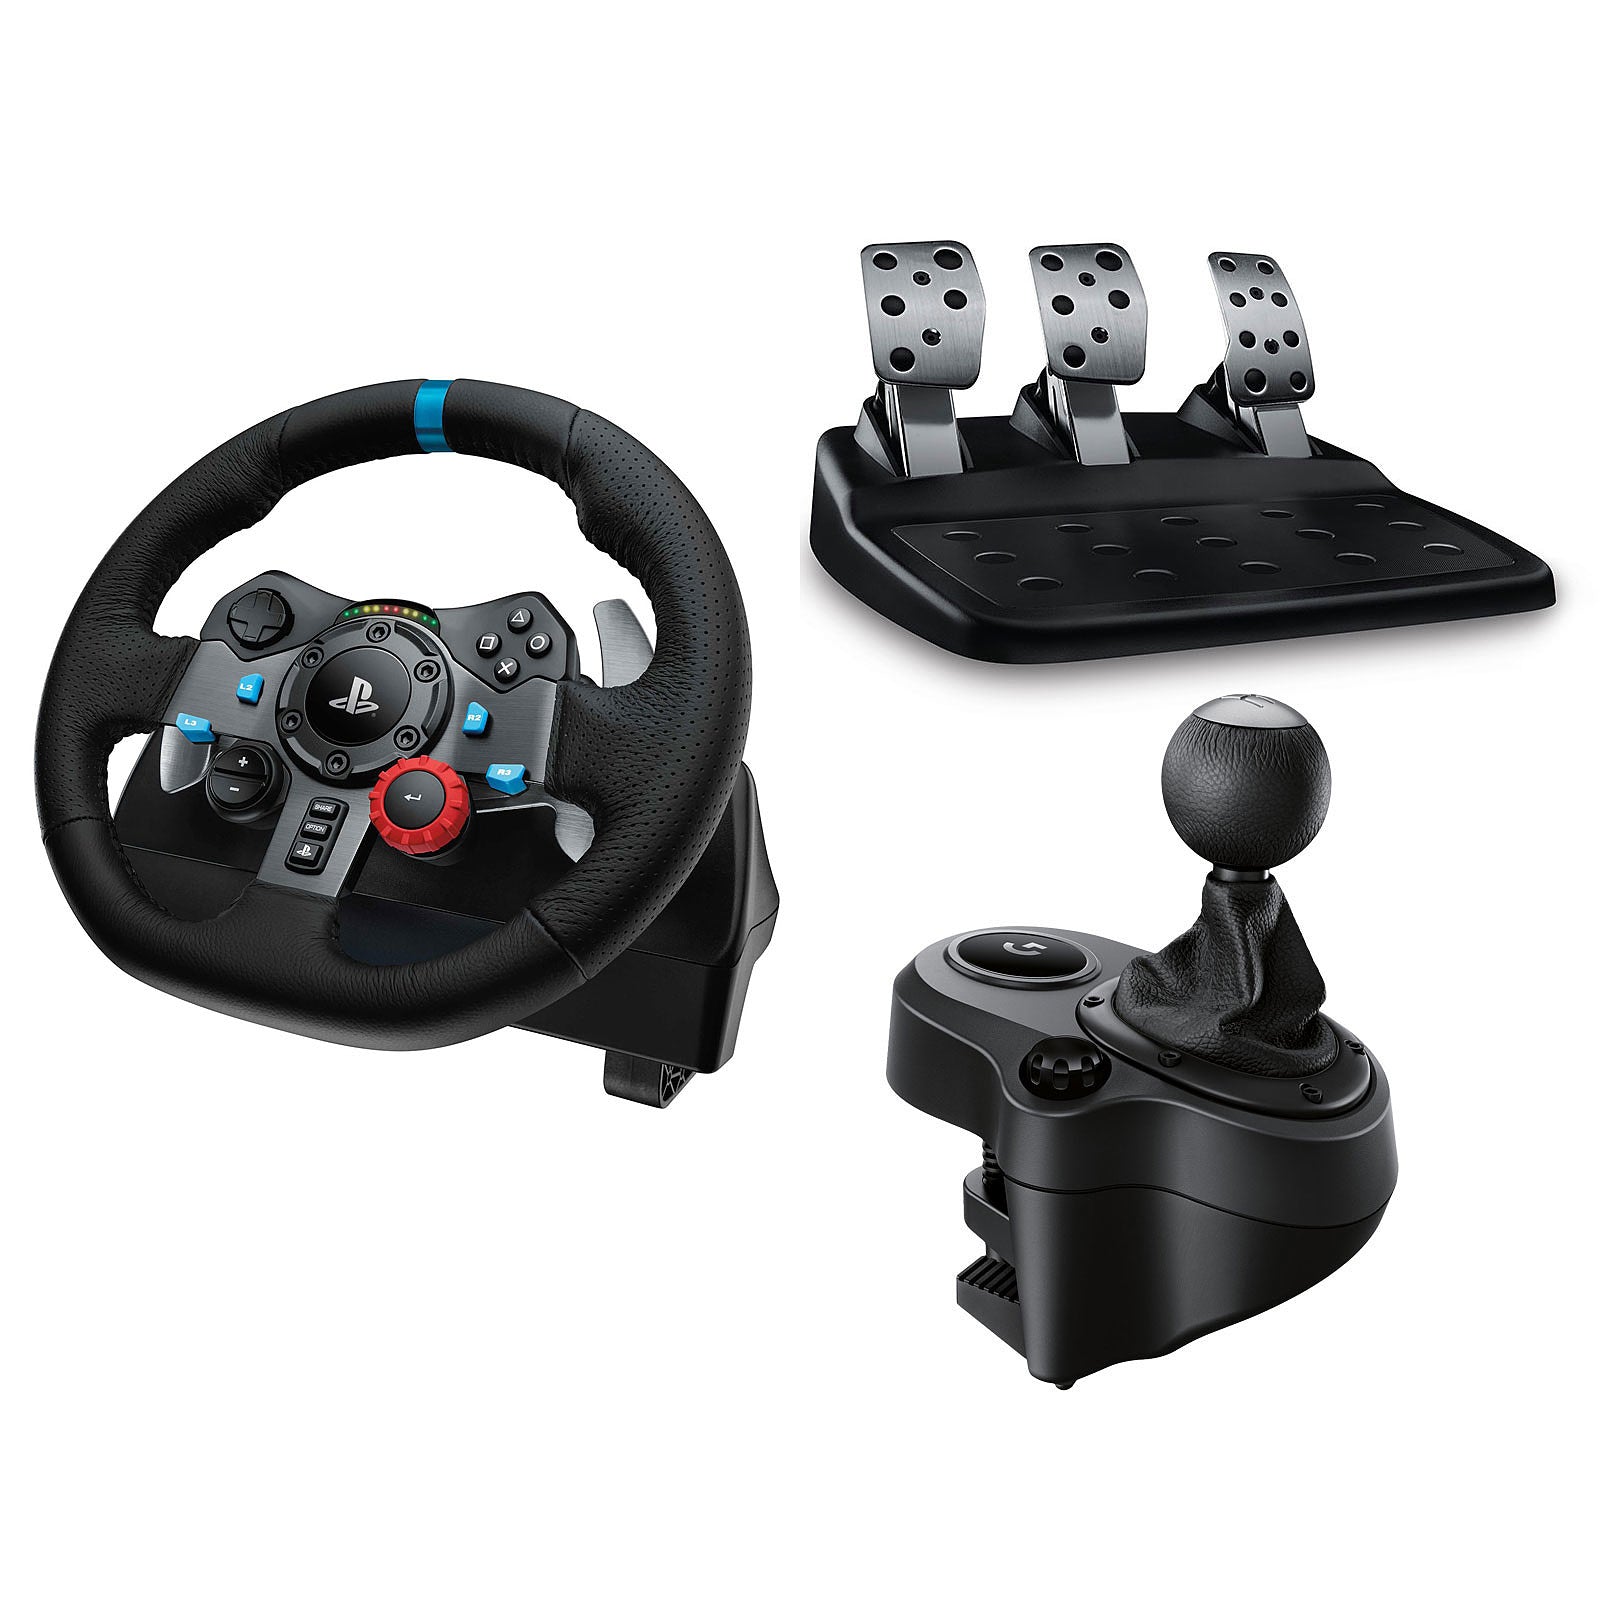 Logitech Driving Force Race Steering Wheel with Shifter Gear Bundl – Game Bros LB